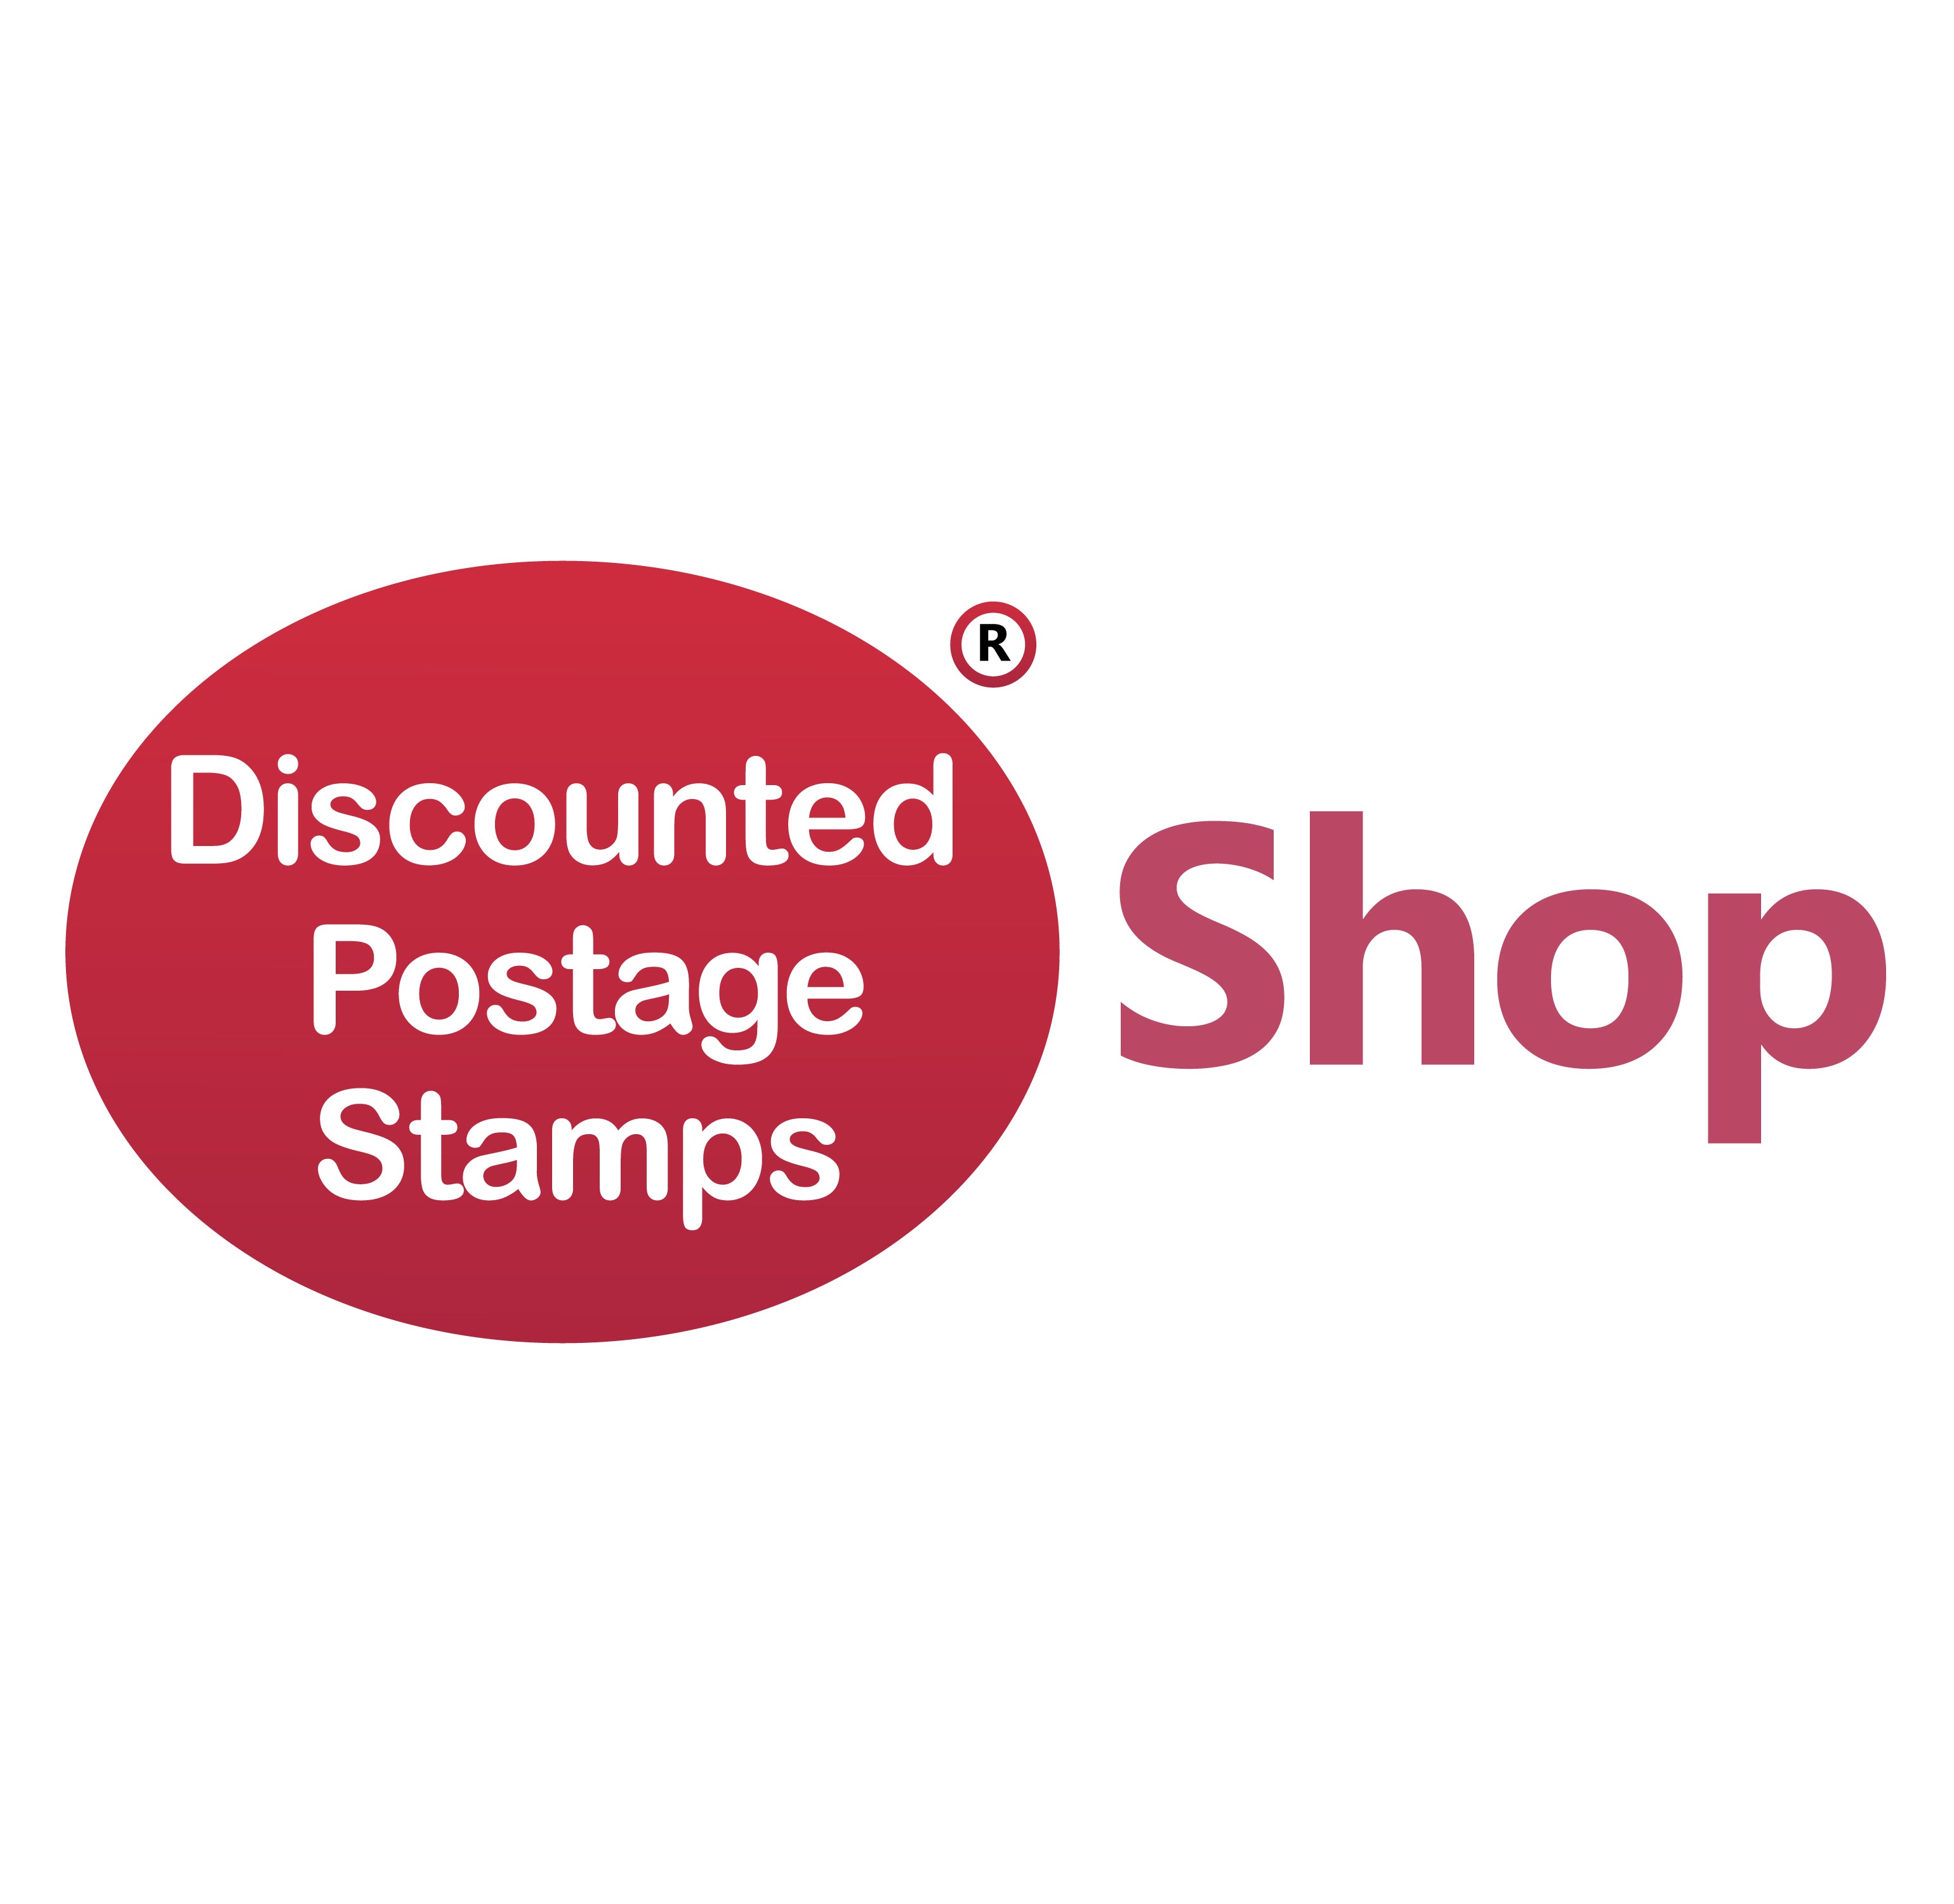 Discounted Postage Stamps